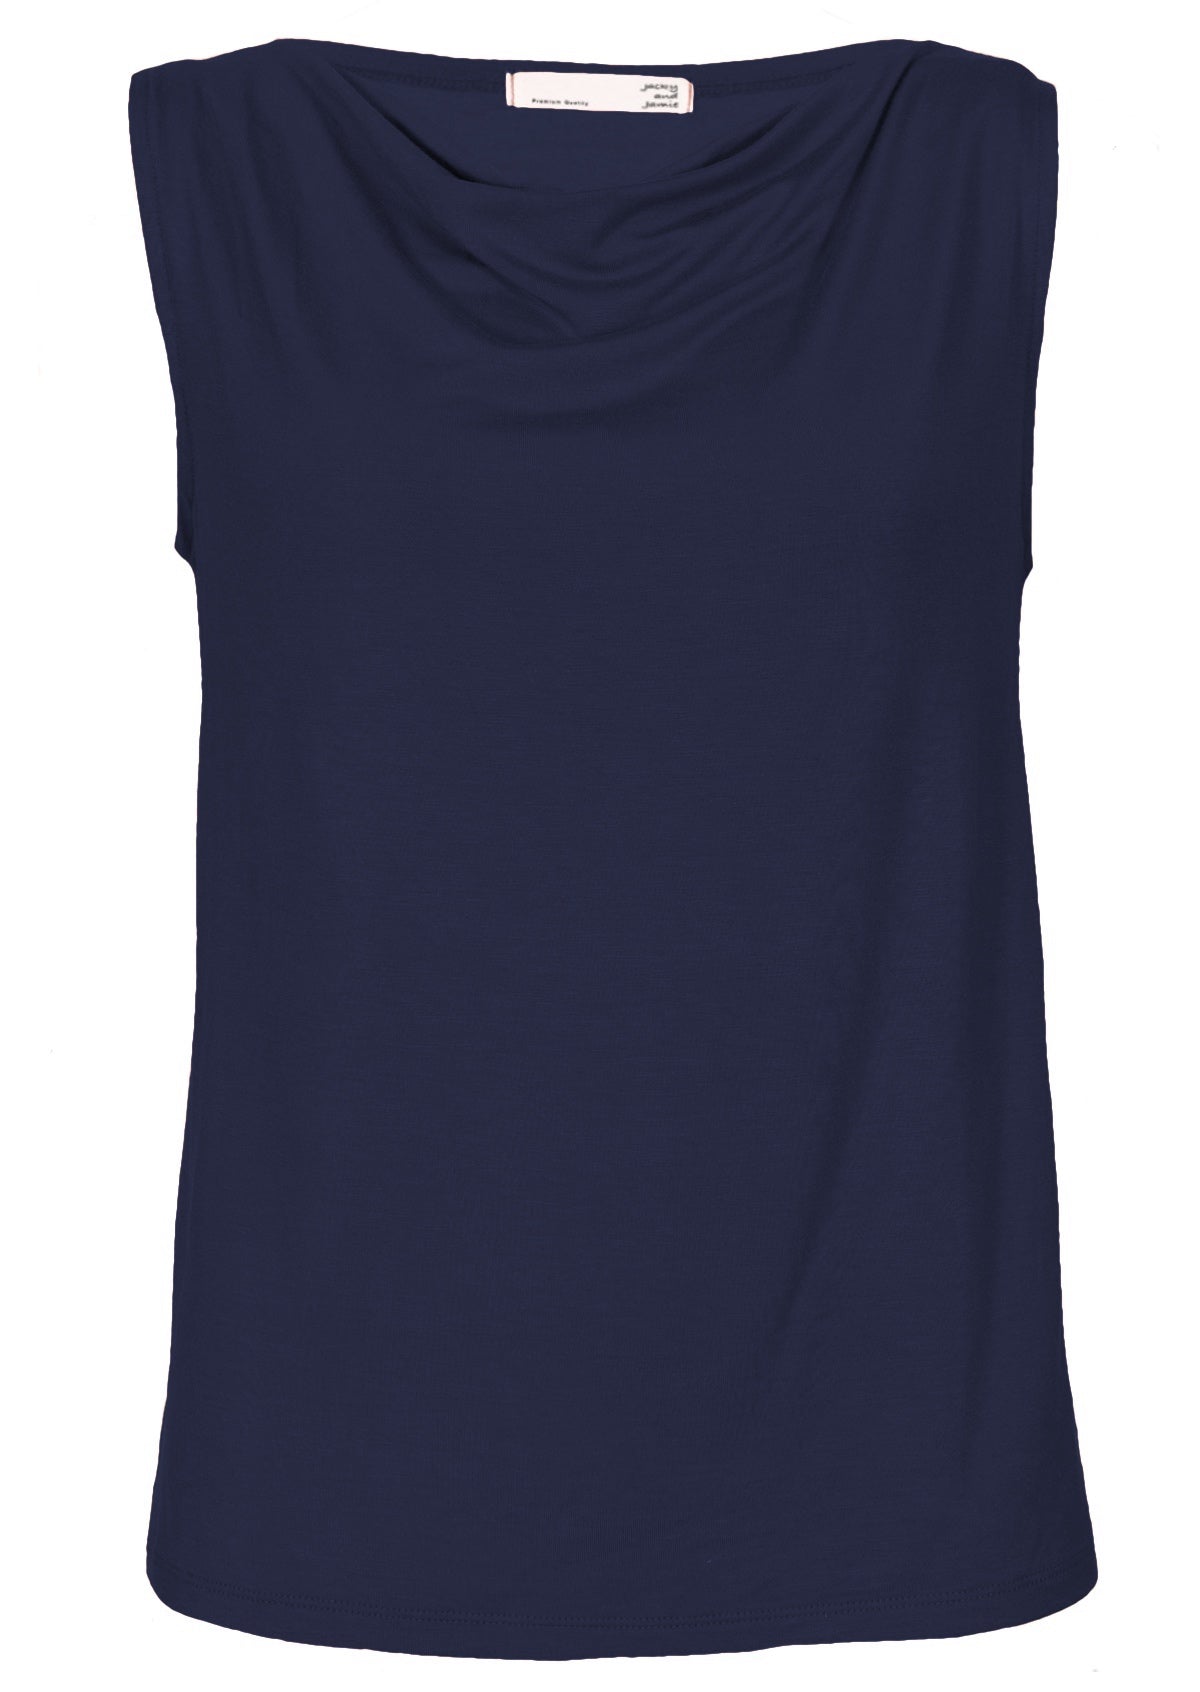 Front view navy blue cowl neck rayon singlet top